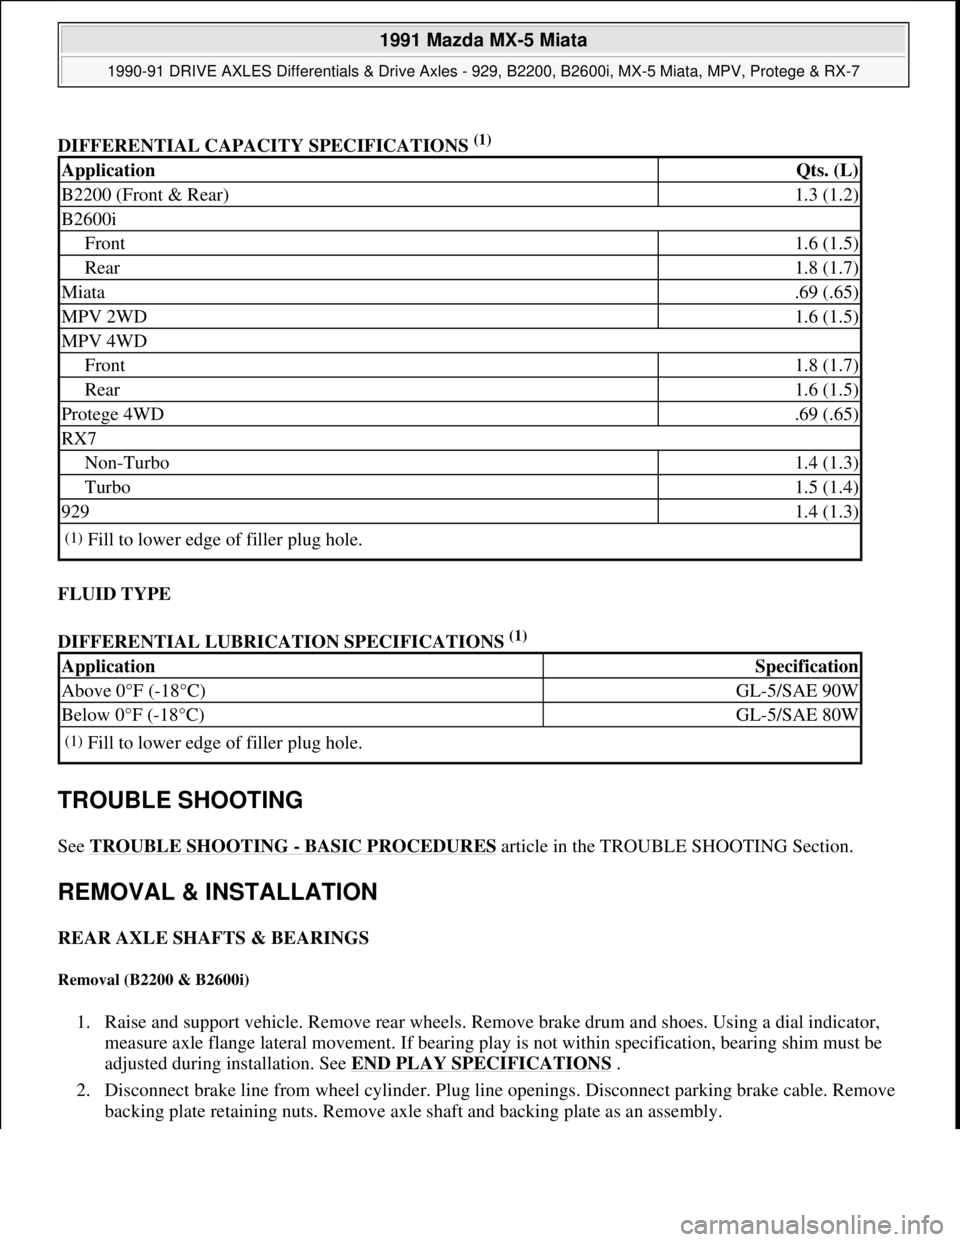 MAZDA MIATA 1991  Factory Service Manual DIFFERENTIAL CAPACITY SPECIFICATIONS (1) 
FLUID TYPE 
DIFFERENTIAL LUBRICATION SPECIFICATIONS 
(1)  
TROUBLE SHOOTING 
See TROUBLE SHOOTING - BASIC PROCEDURES article in the TROUBLE SHOOTING Section. 